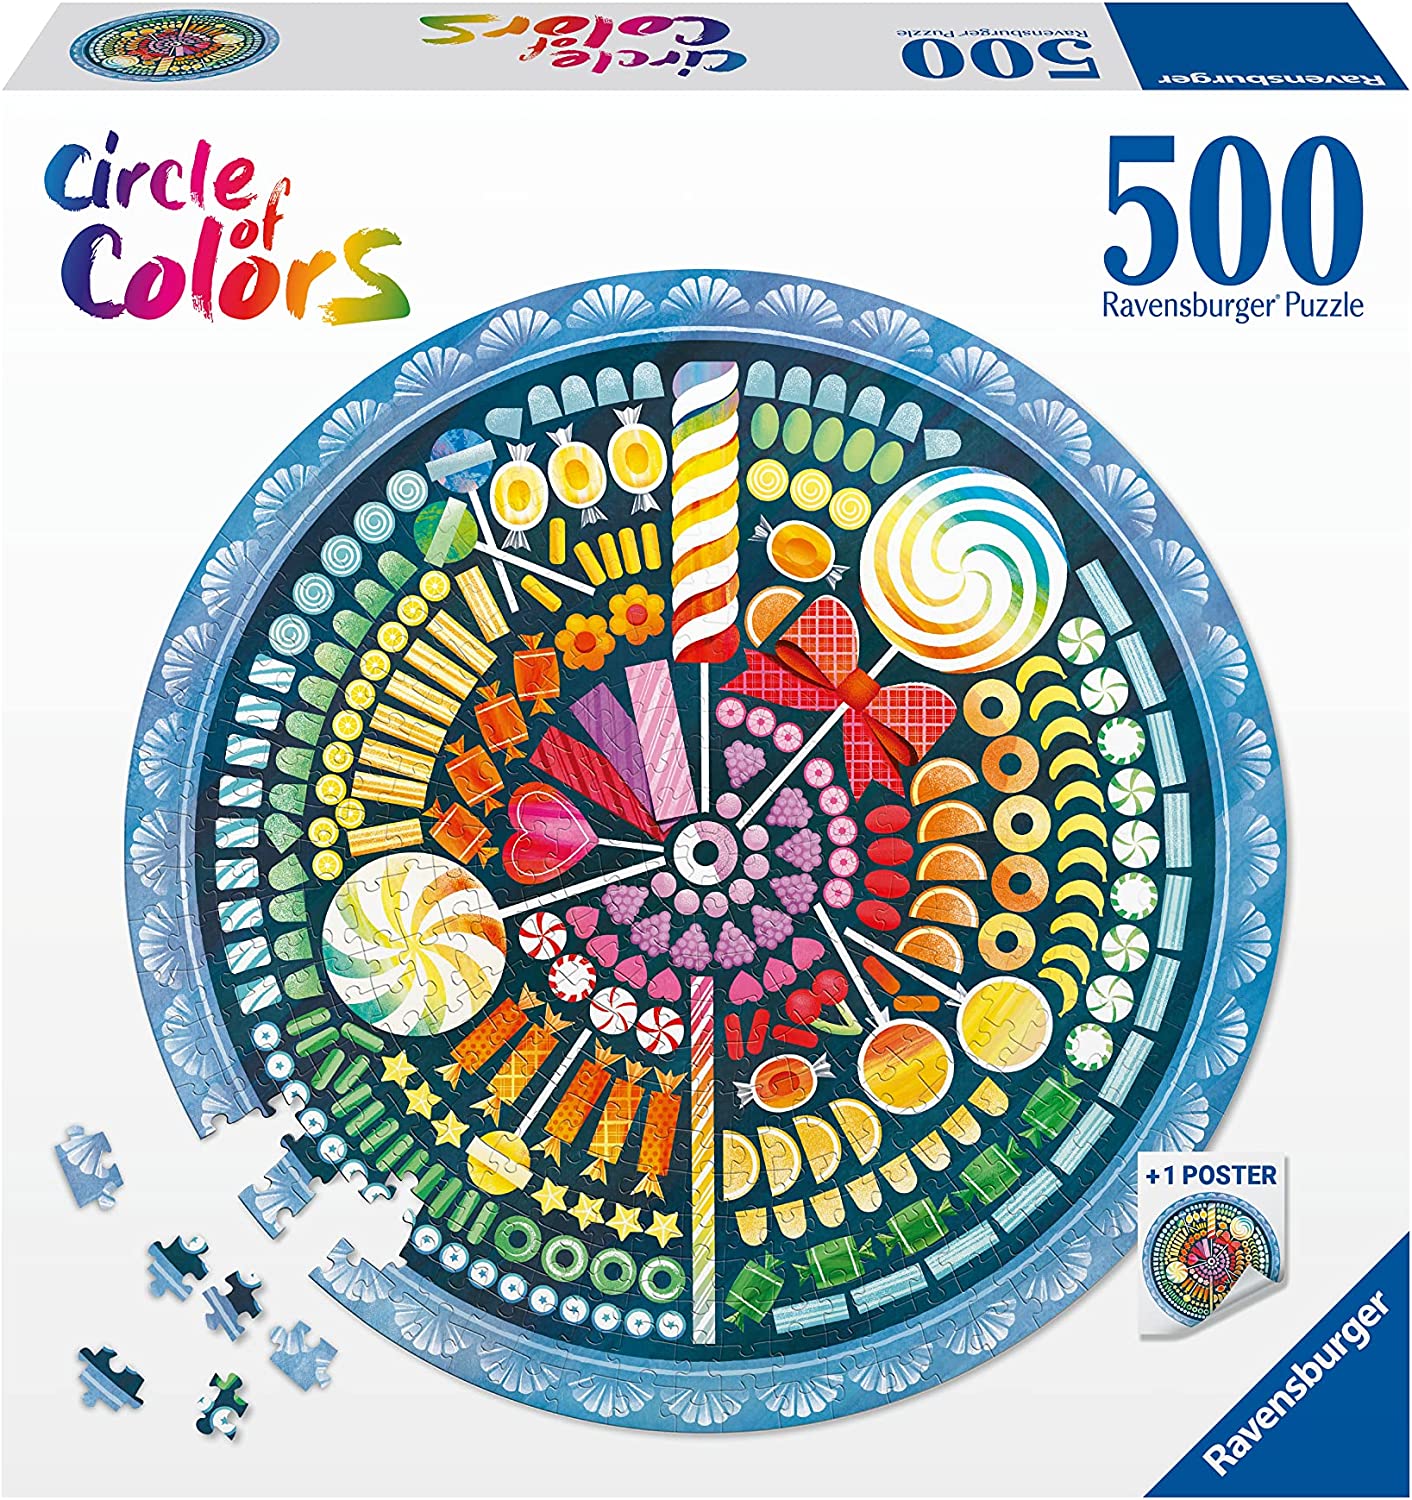 RAVENSBURGER 17350 1 CIRCLE OF COLORS - CANDY 500 PIECE PUZZLE